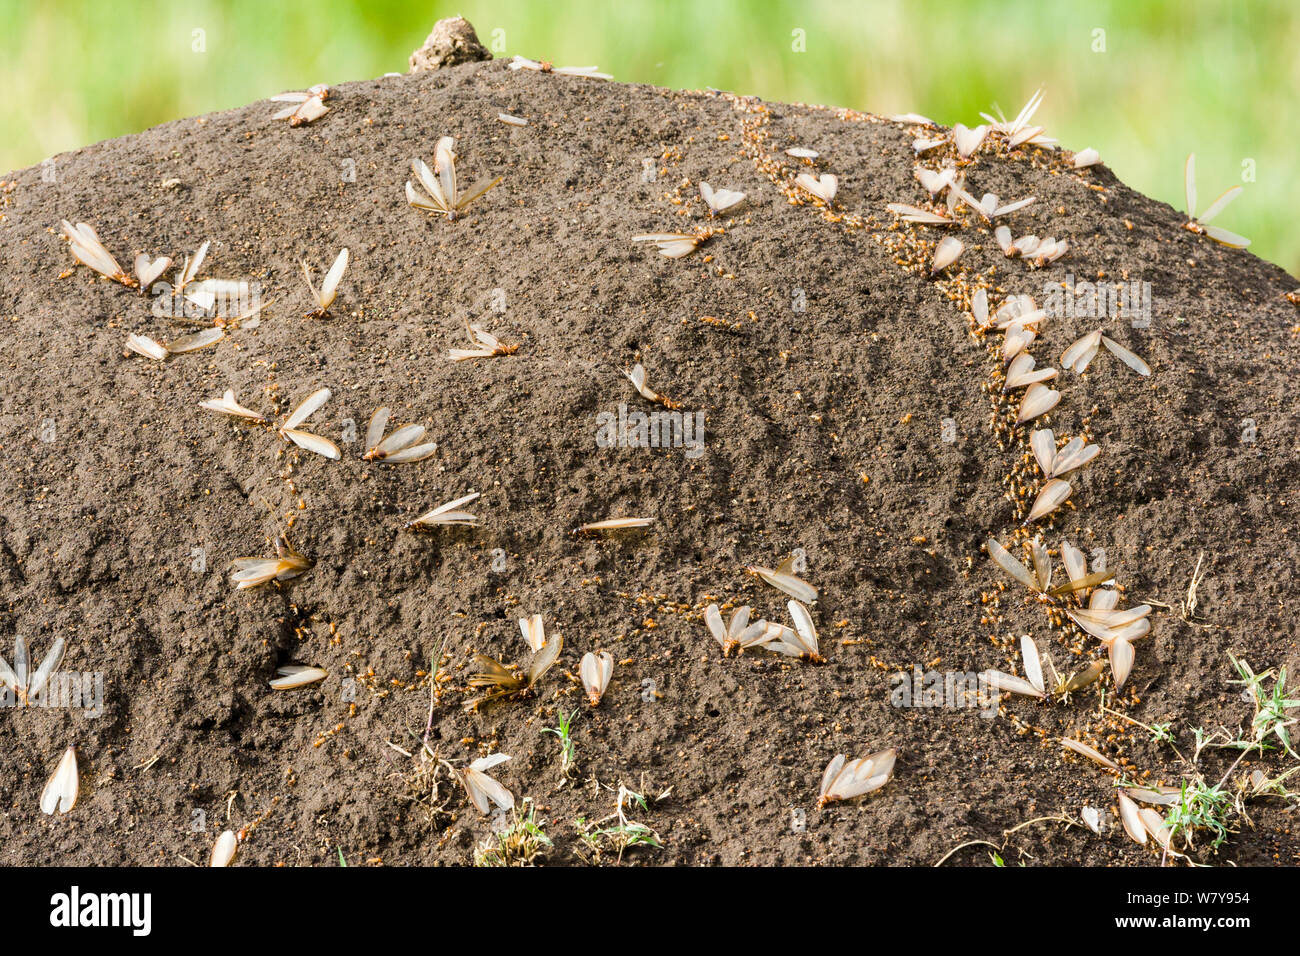 Termites (Isoptera) on a termite mound after the rain, Masai-Mara Game Reserve, Kenya. March. Stock Photo